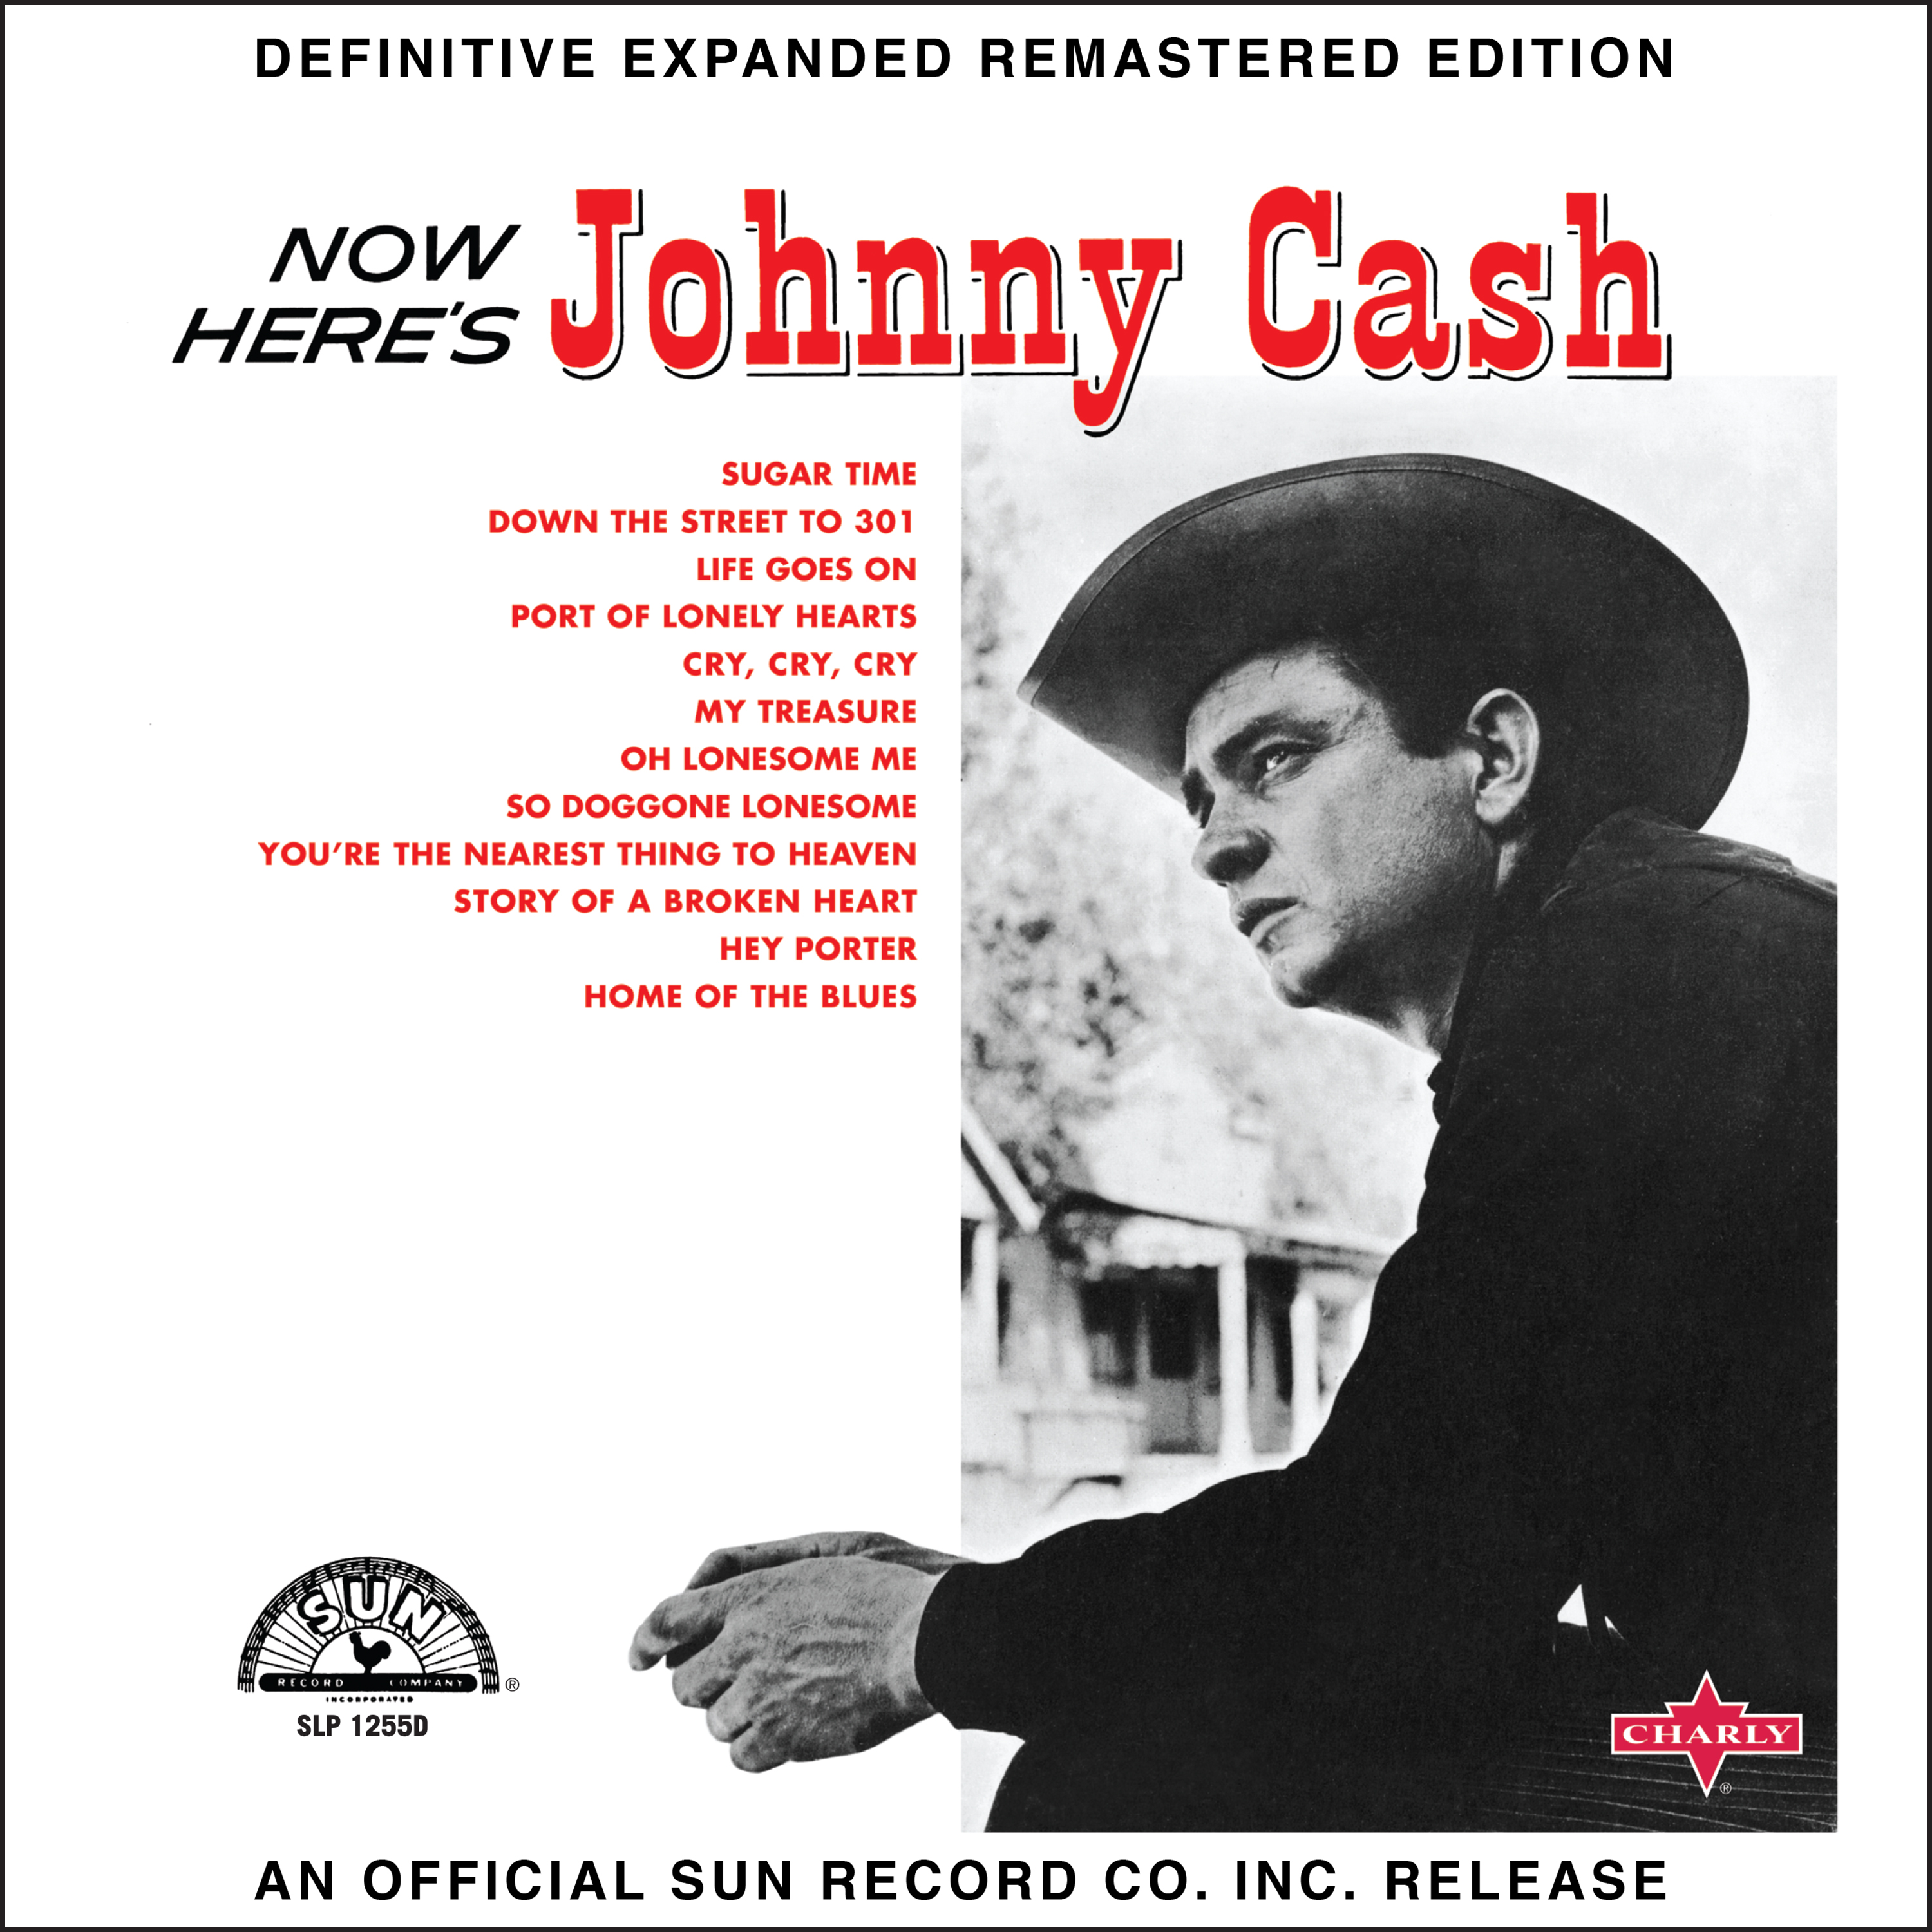 Now Here's Johnny Cash (2017 Definitive Expanded Remastered Edition)